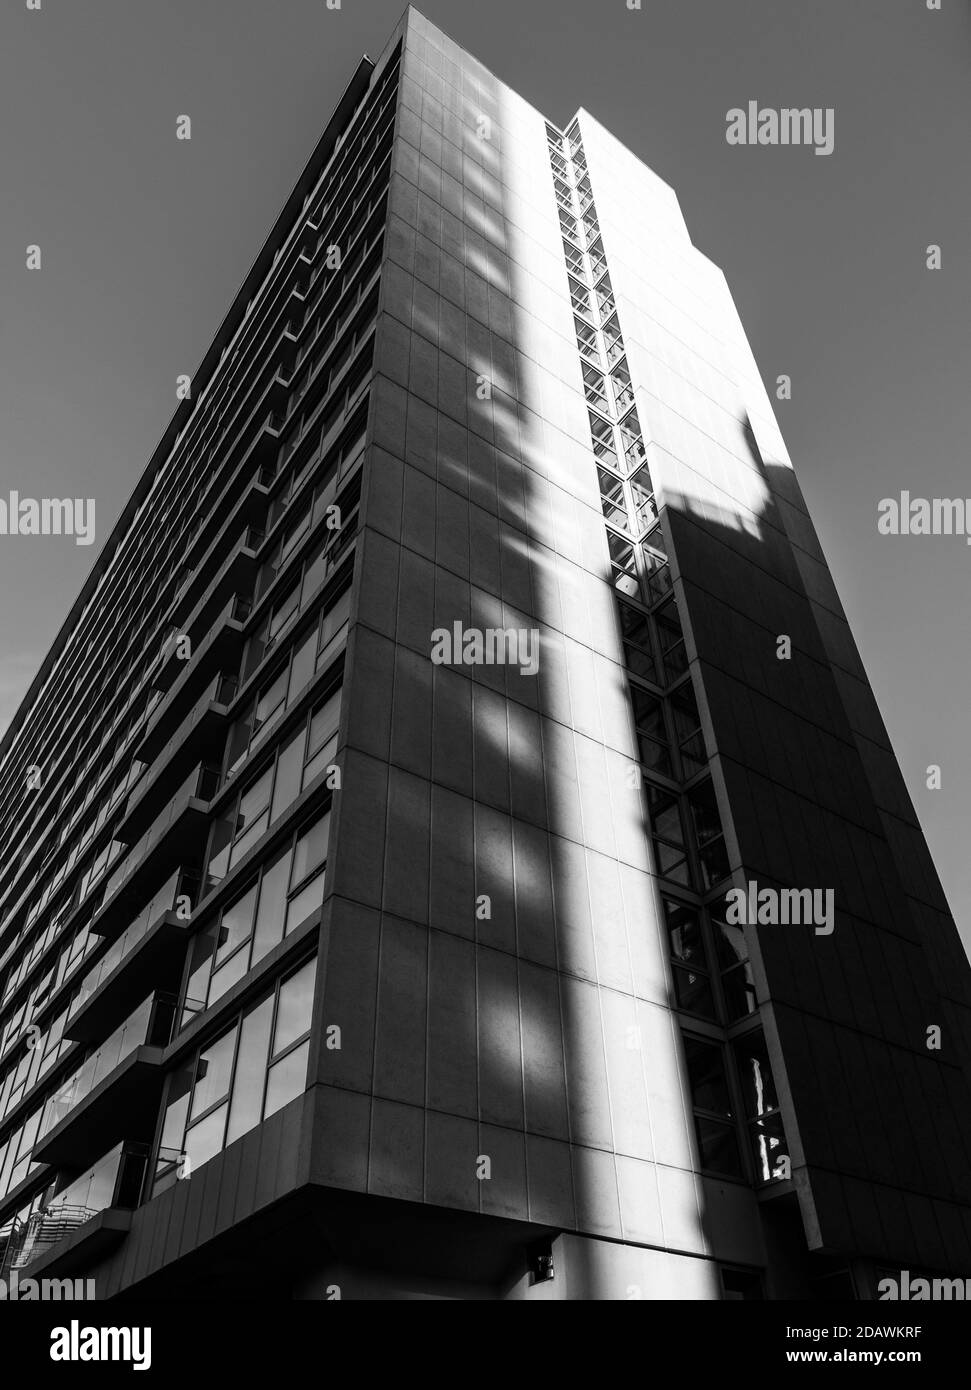 Black and white monochrome image looking up at a tall apartment building on a clear sunny day with vertical shadows cast across Stock Photo